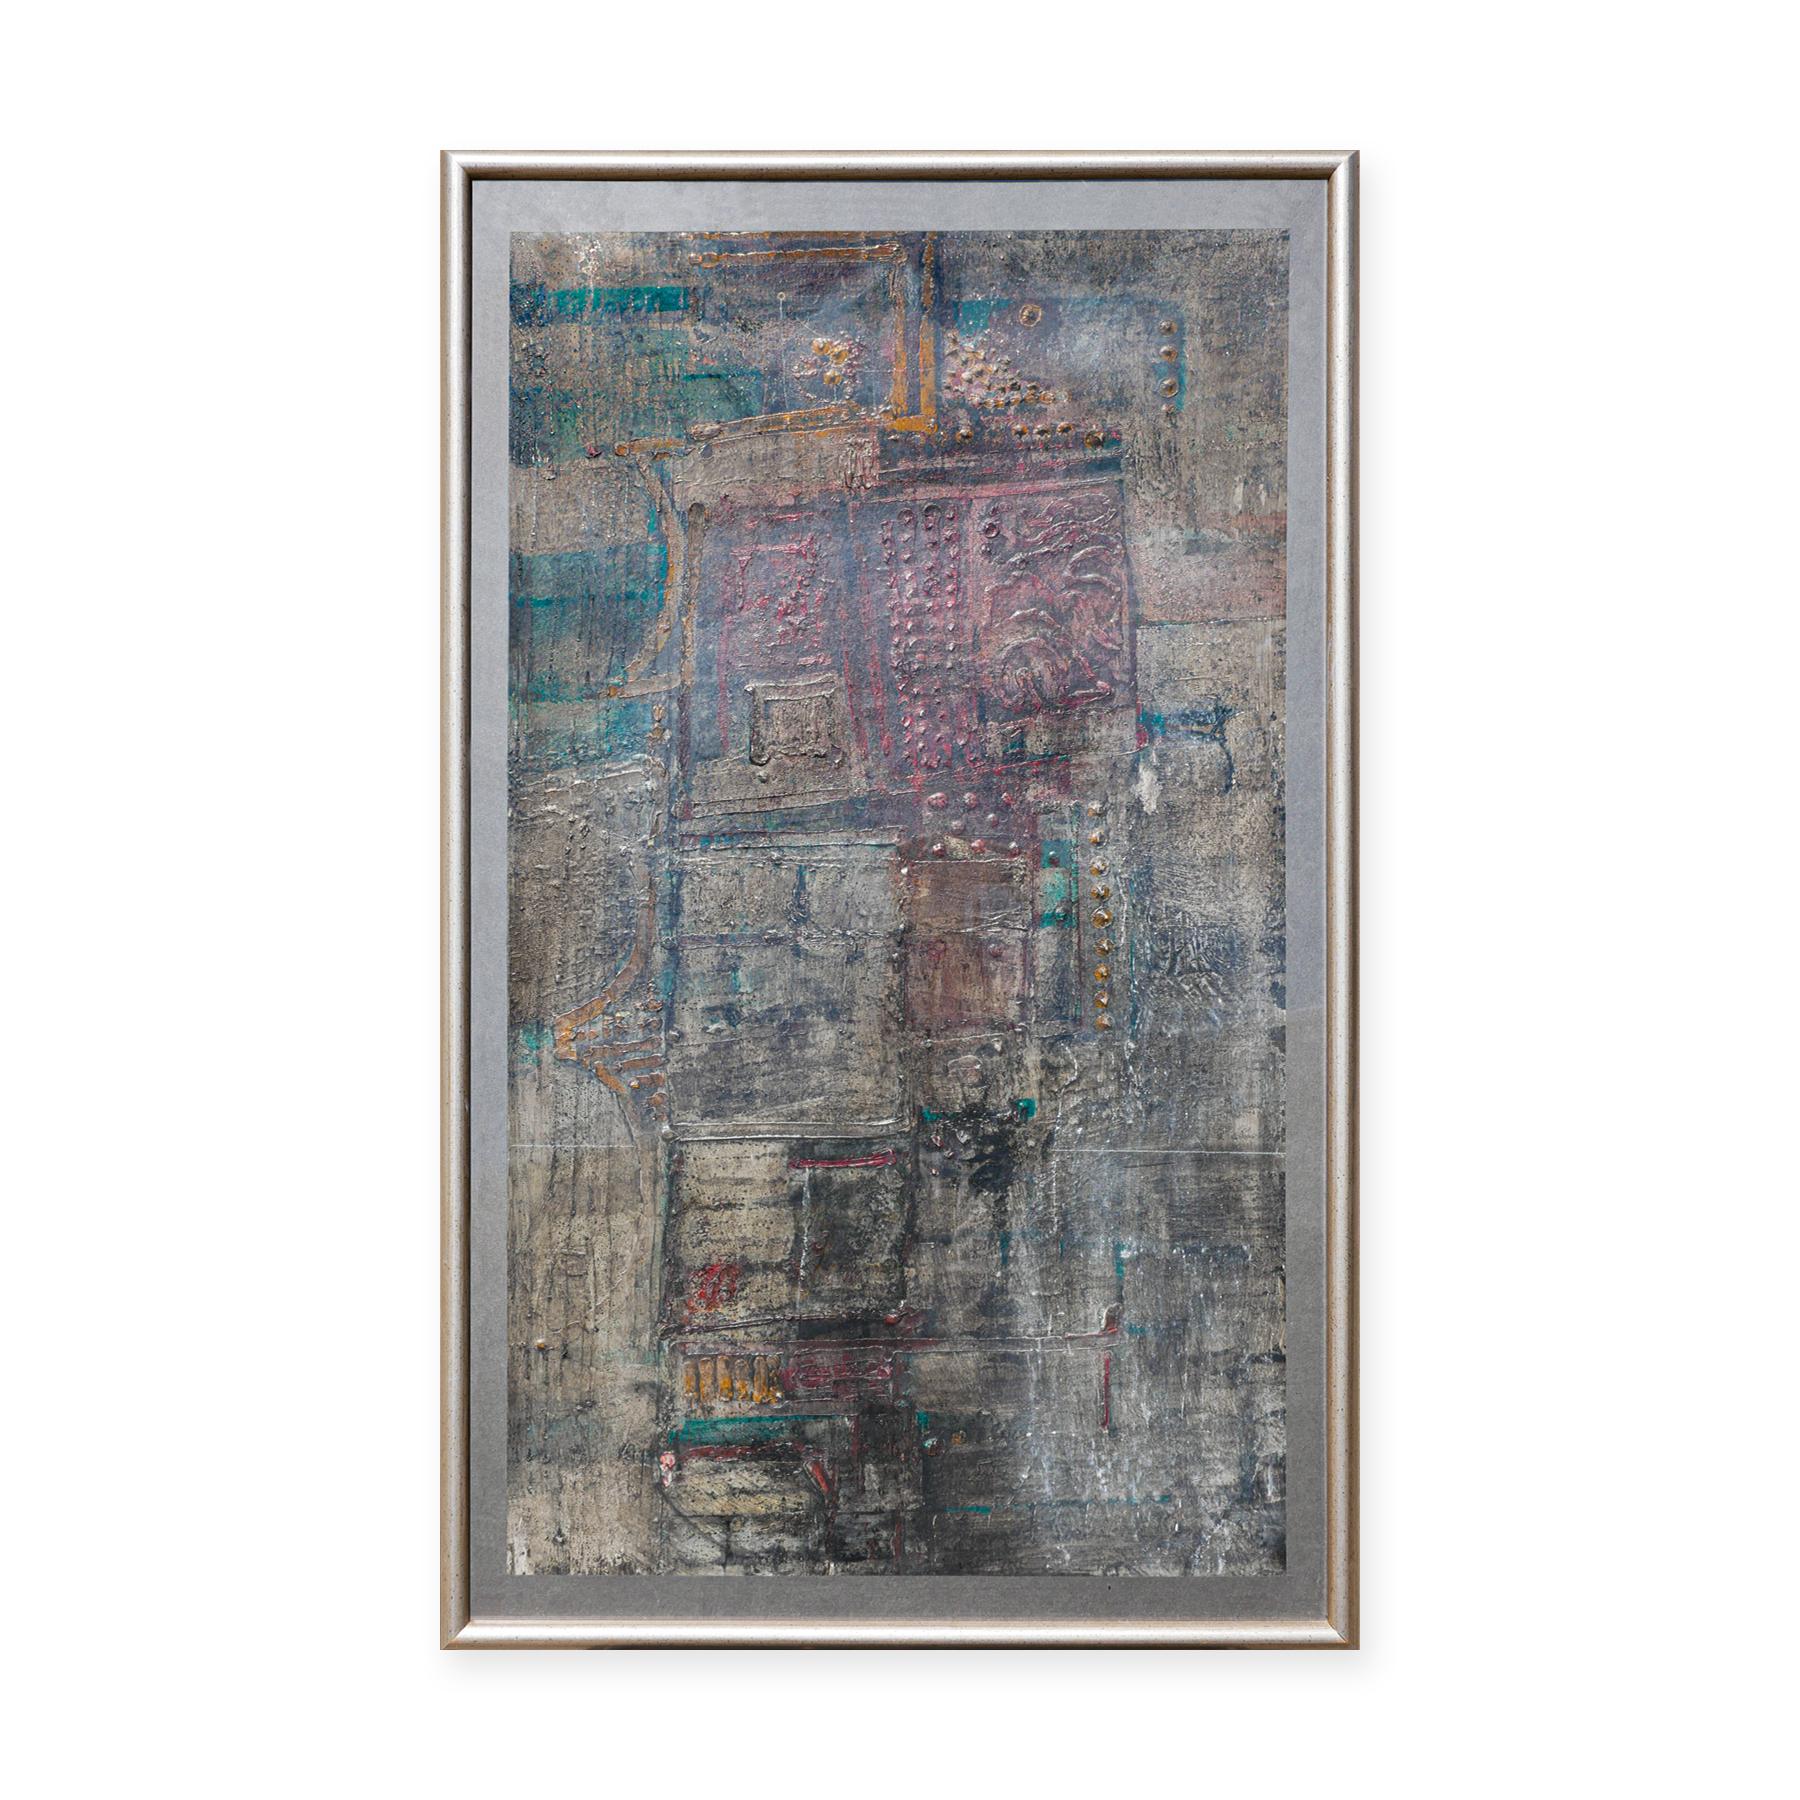 Dark gray and blue-toned abstract expressionist painting by Louisiana artist William Lee Moreland (William L. Moreland). The piece is framed behind glass and includes information on the piece at the back.

Dimensions Without Frame: H 27.5 in x W